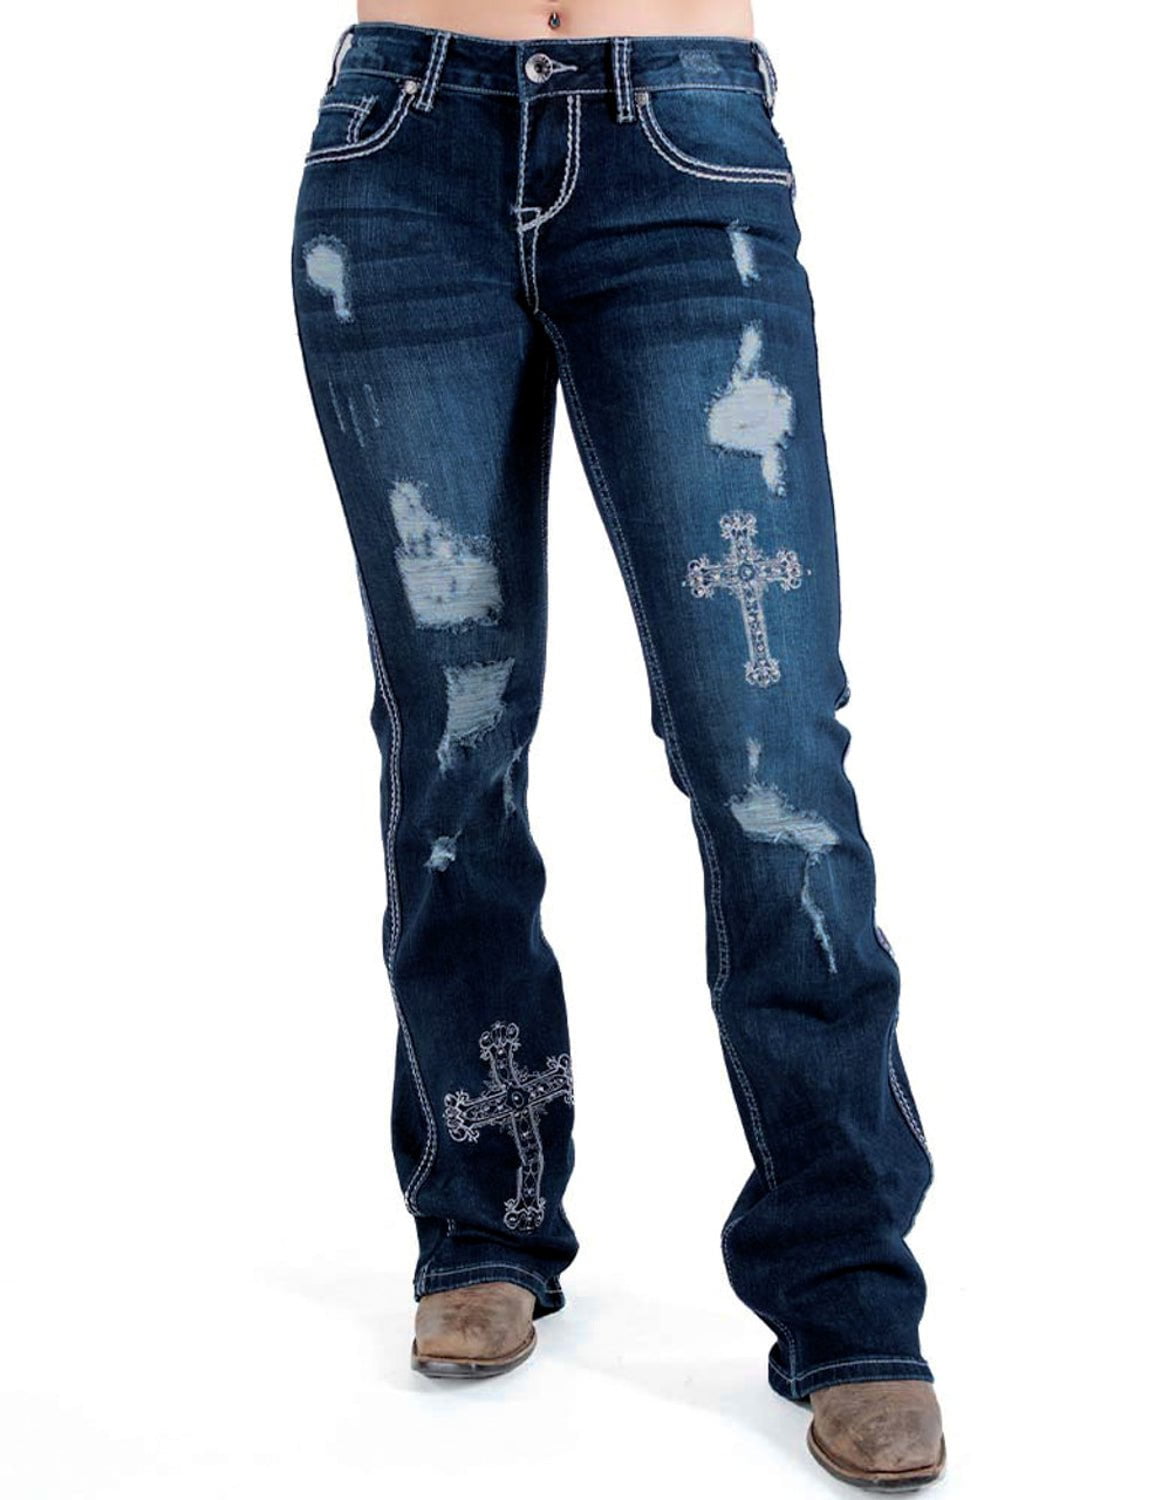 Teal Snake Print Flared Jeans | Flare jeans, Crazy train clothing, Women